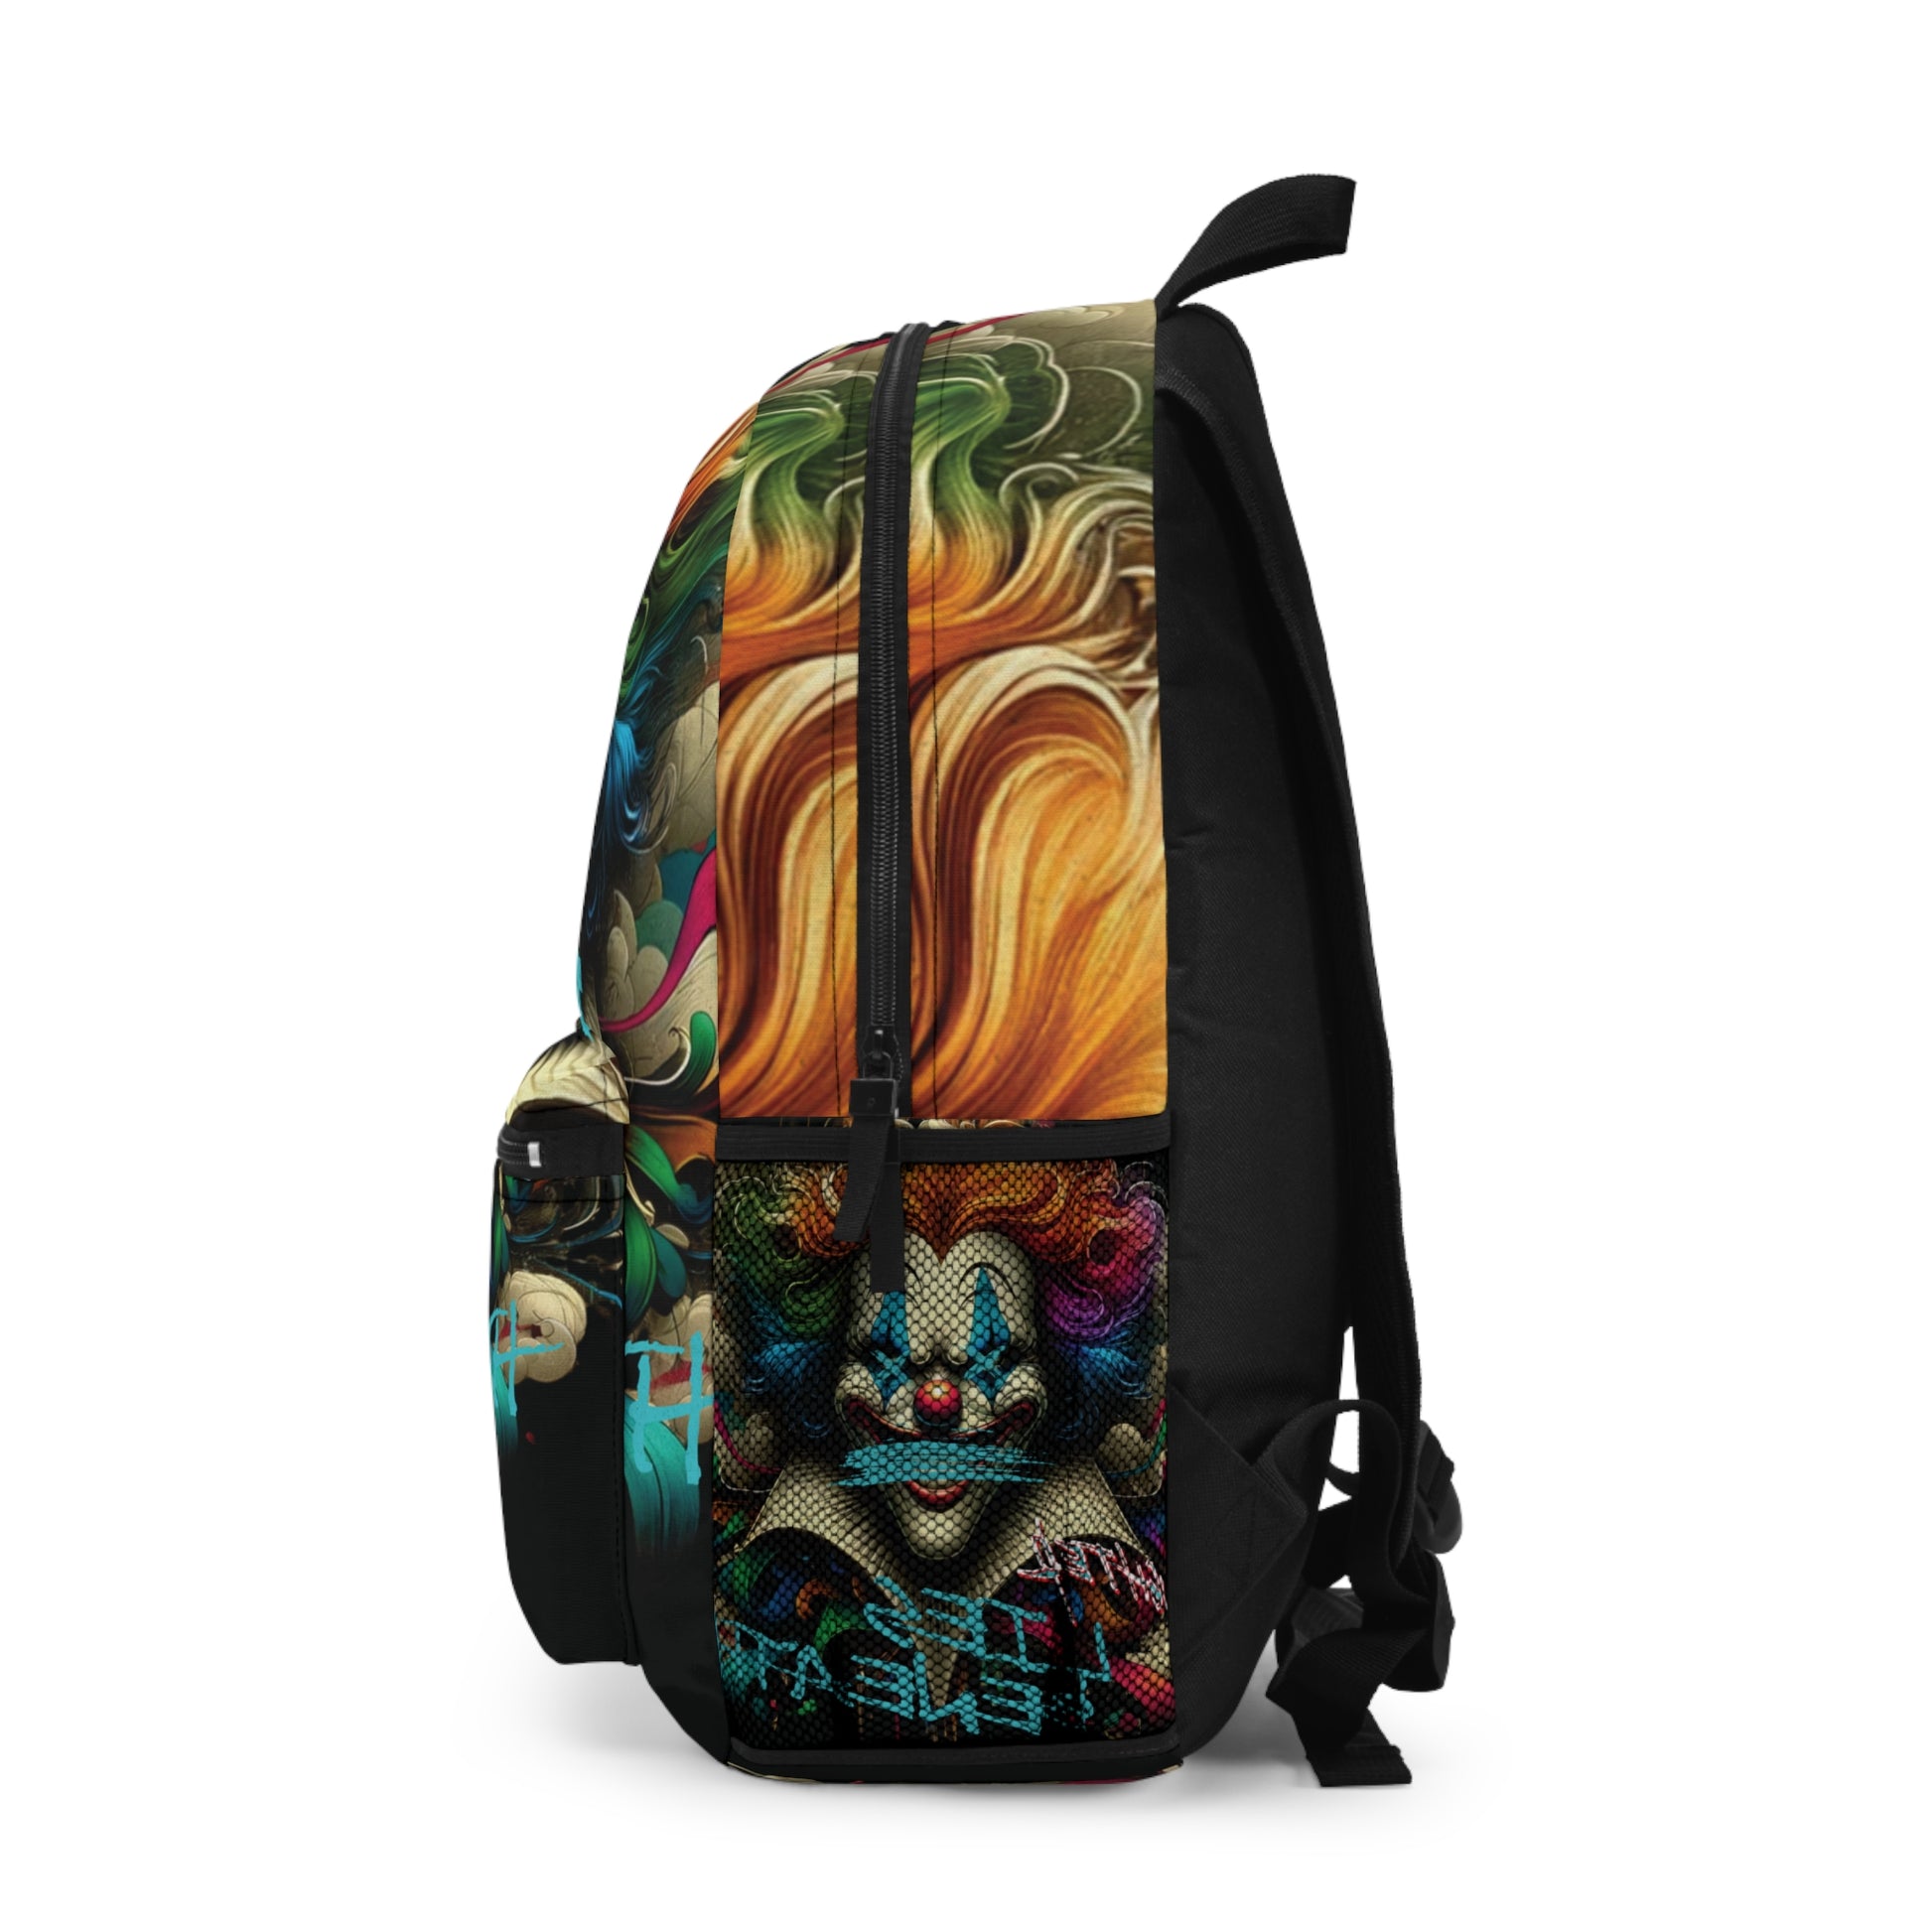 The Silent Prince" Waterproof Backpack with Adjustable Straps